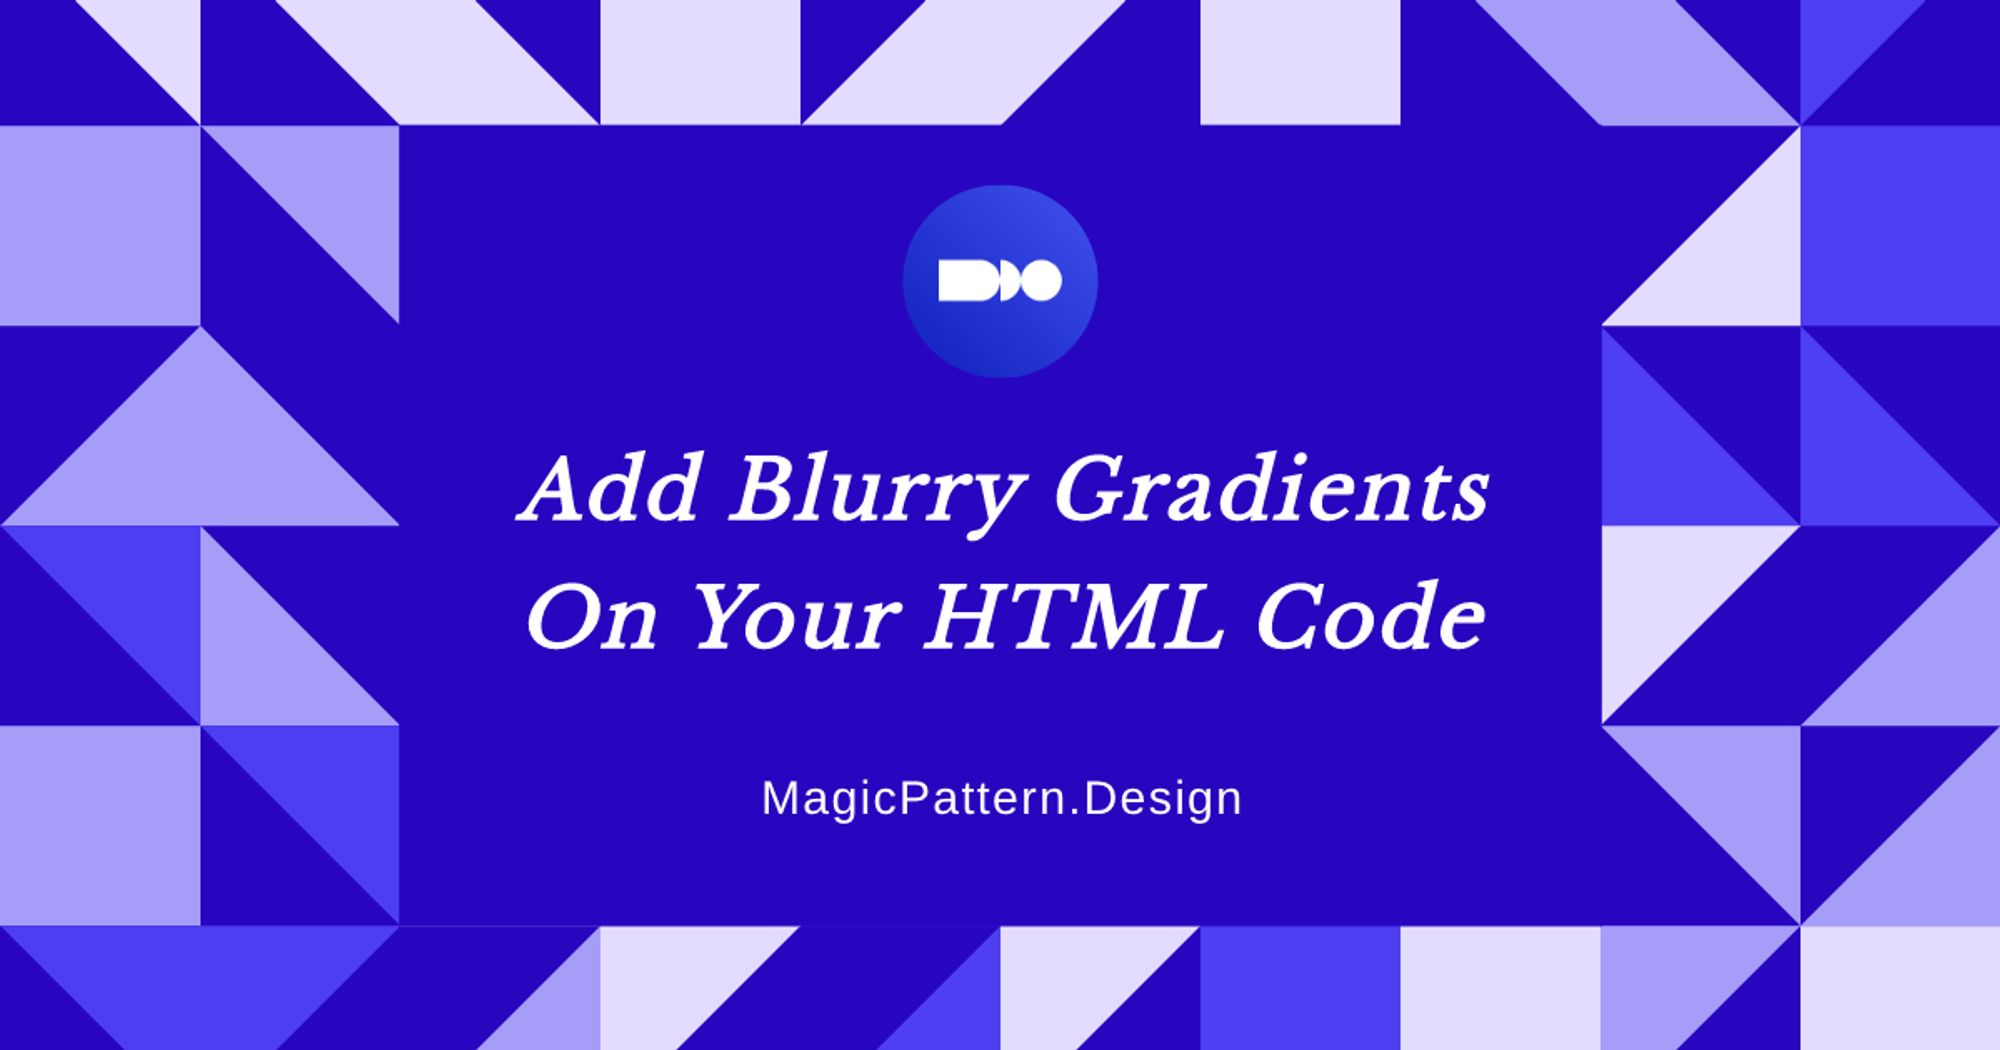 Add a blurry gradient to your HTML code